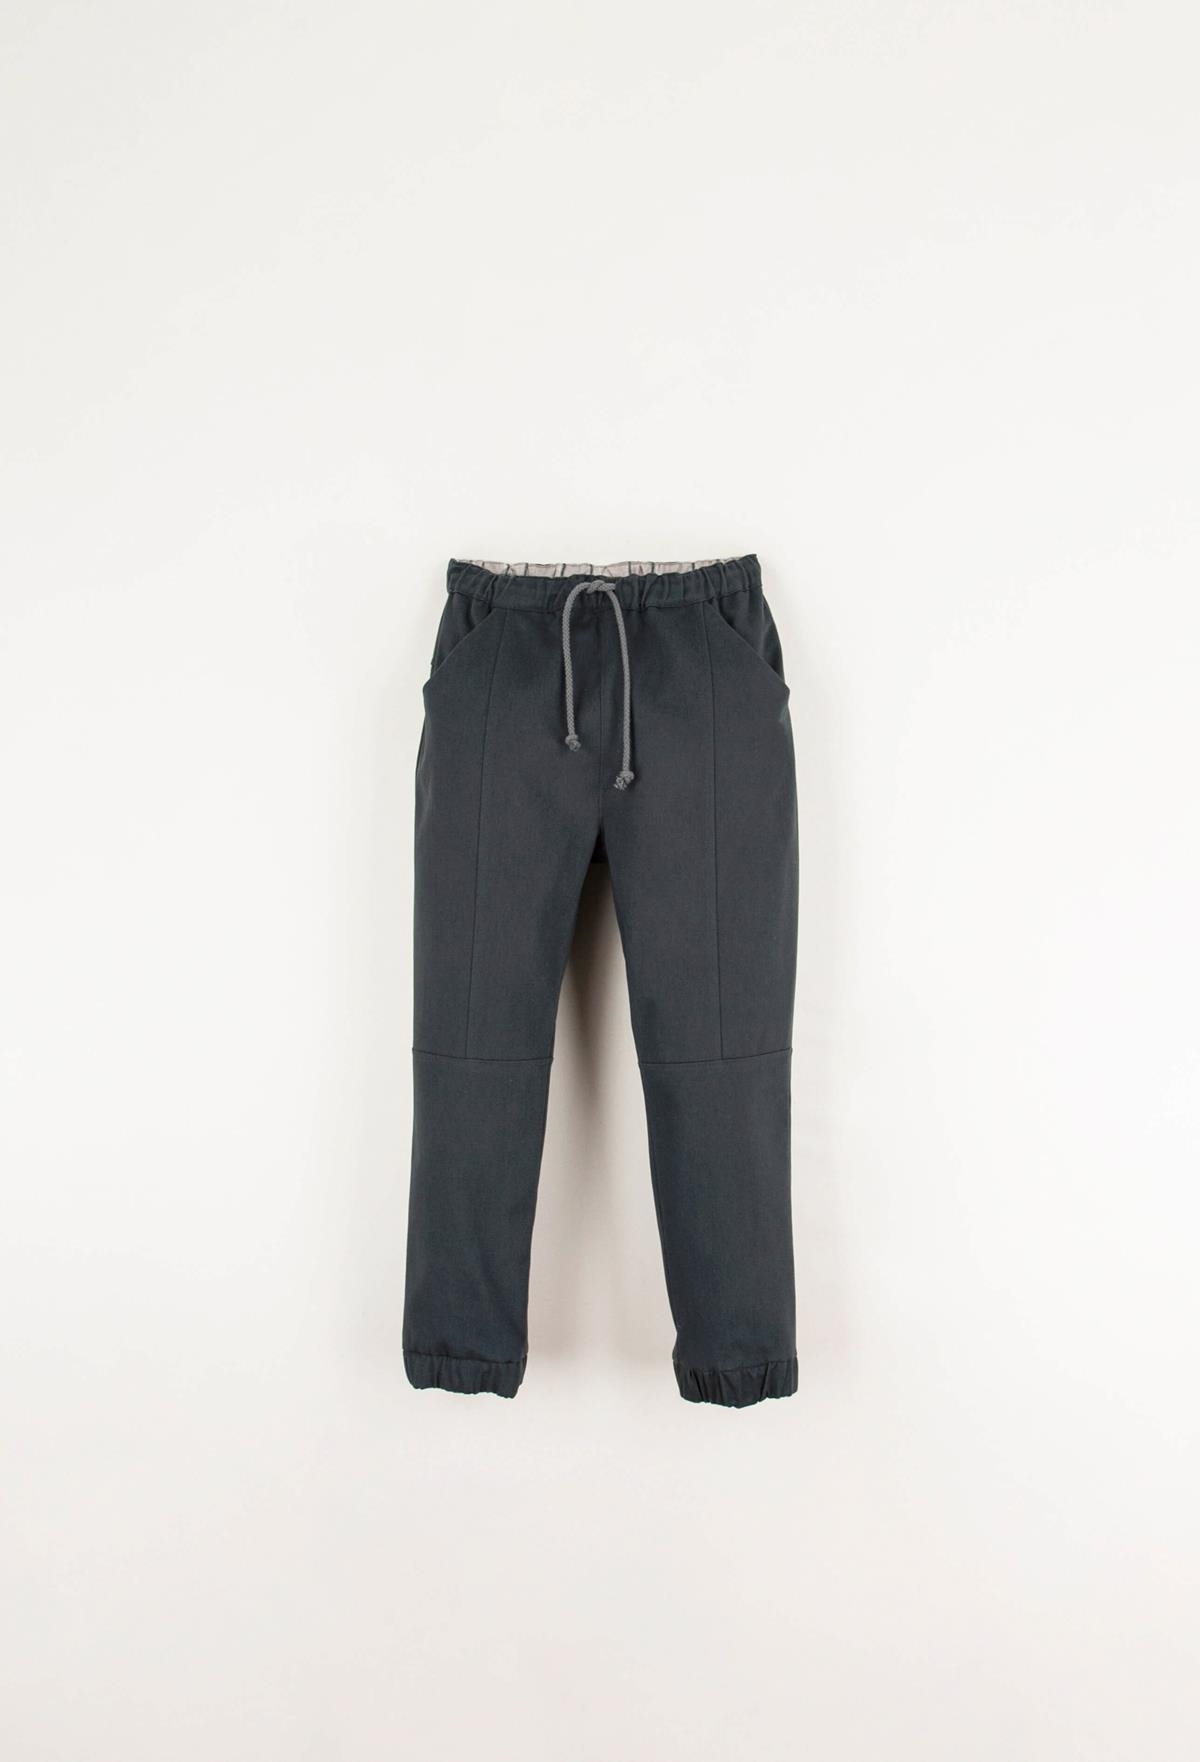 Mod.22.3 Grey jogger trousers with pockets | AW22.23 Mod.22.3 Grey jogger trousers with pockets